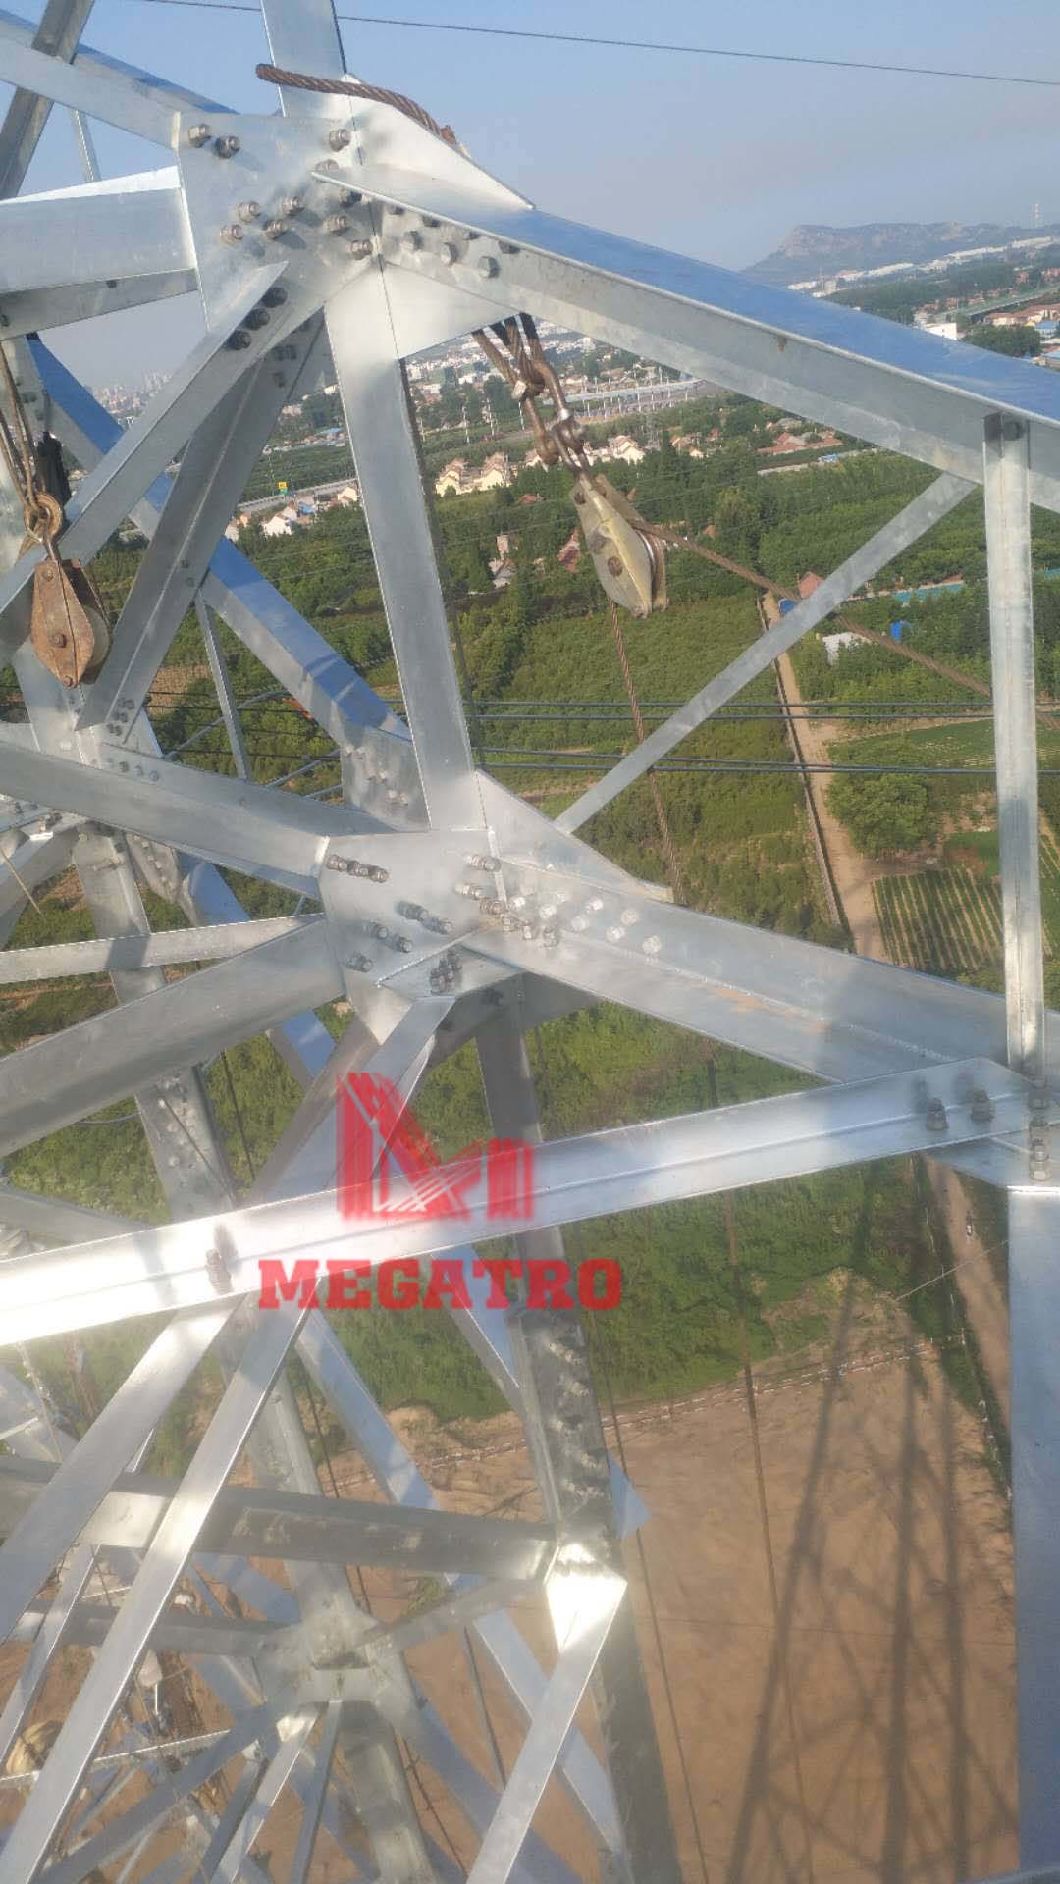 Megatro 500kv Line 5e6 Sj1 Double Circuit Tension and Electric Transmission Steel Tower